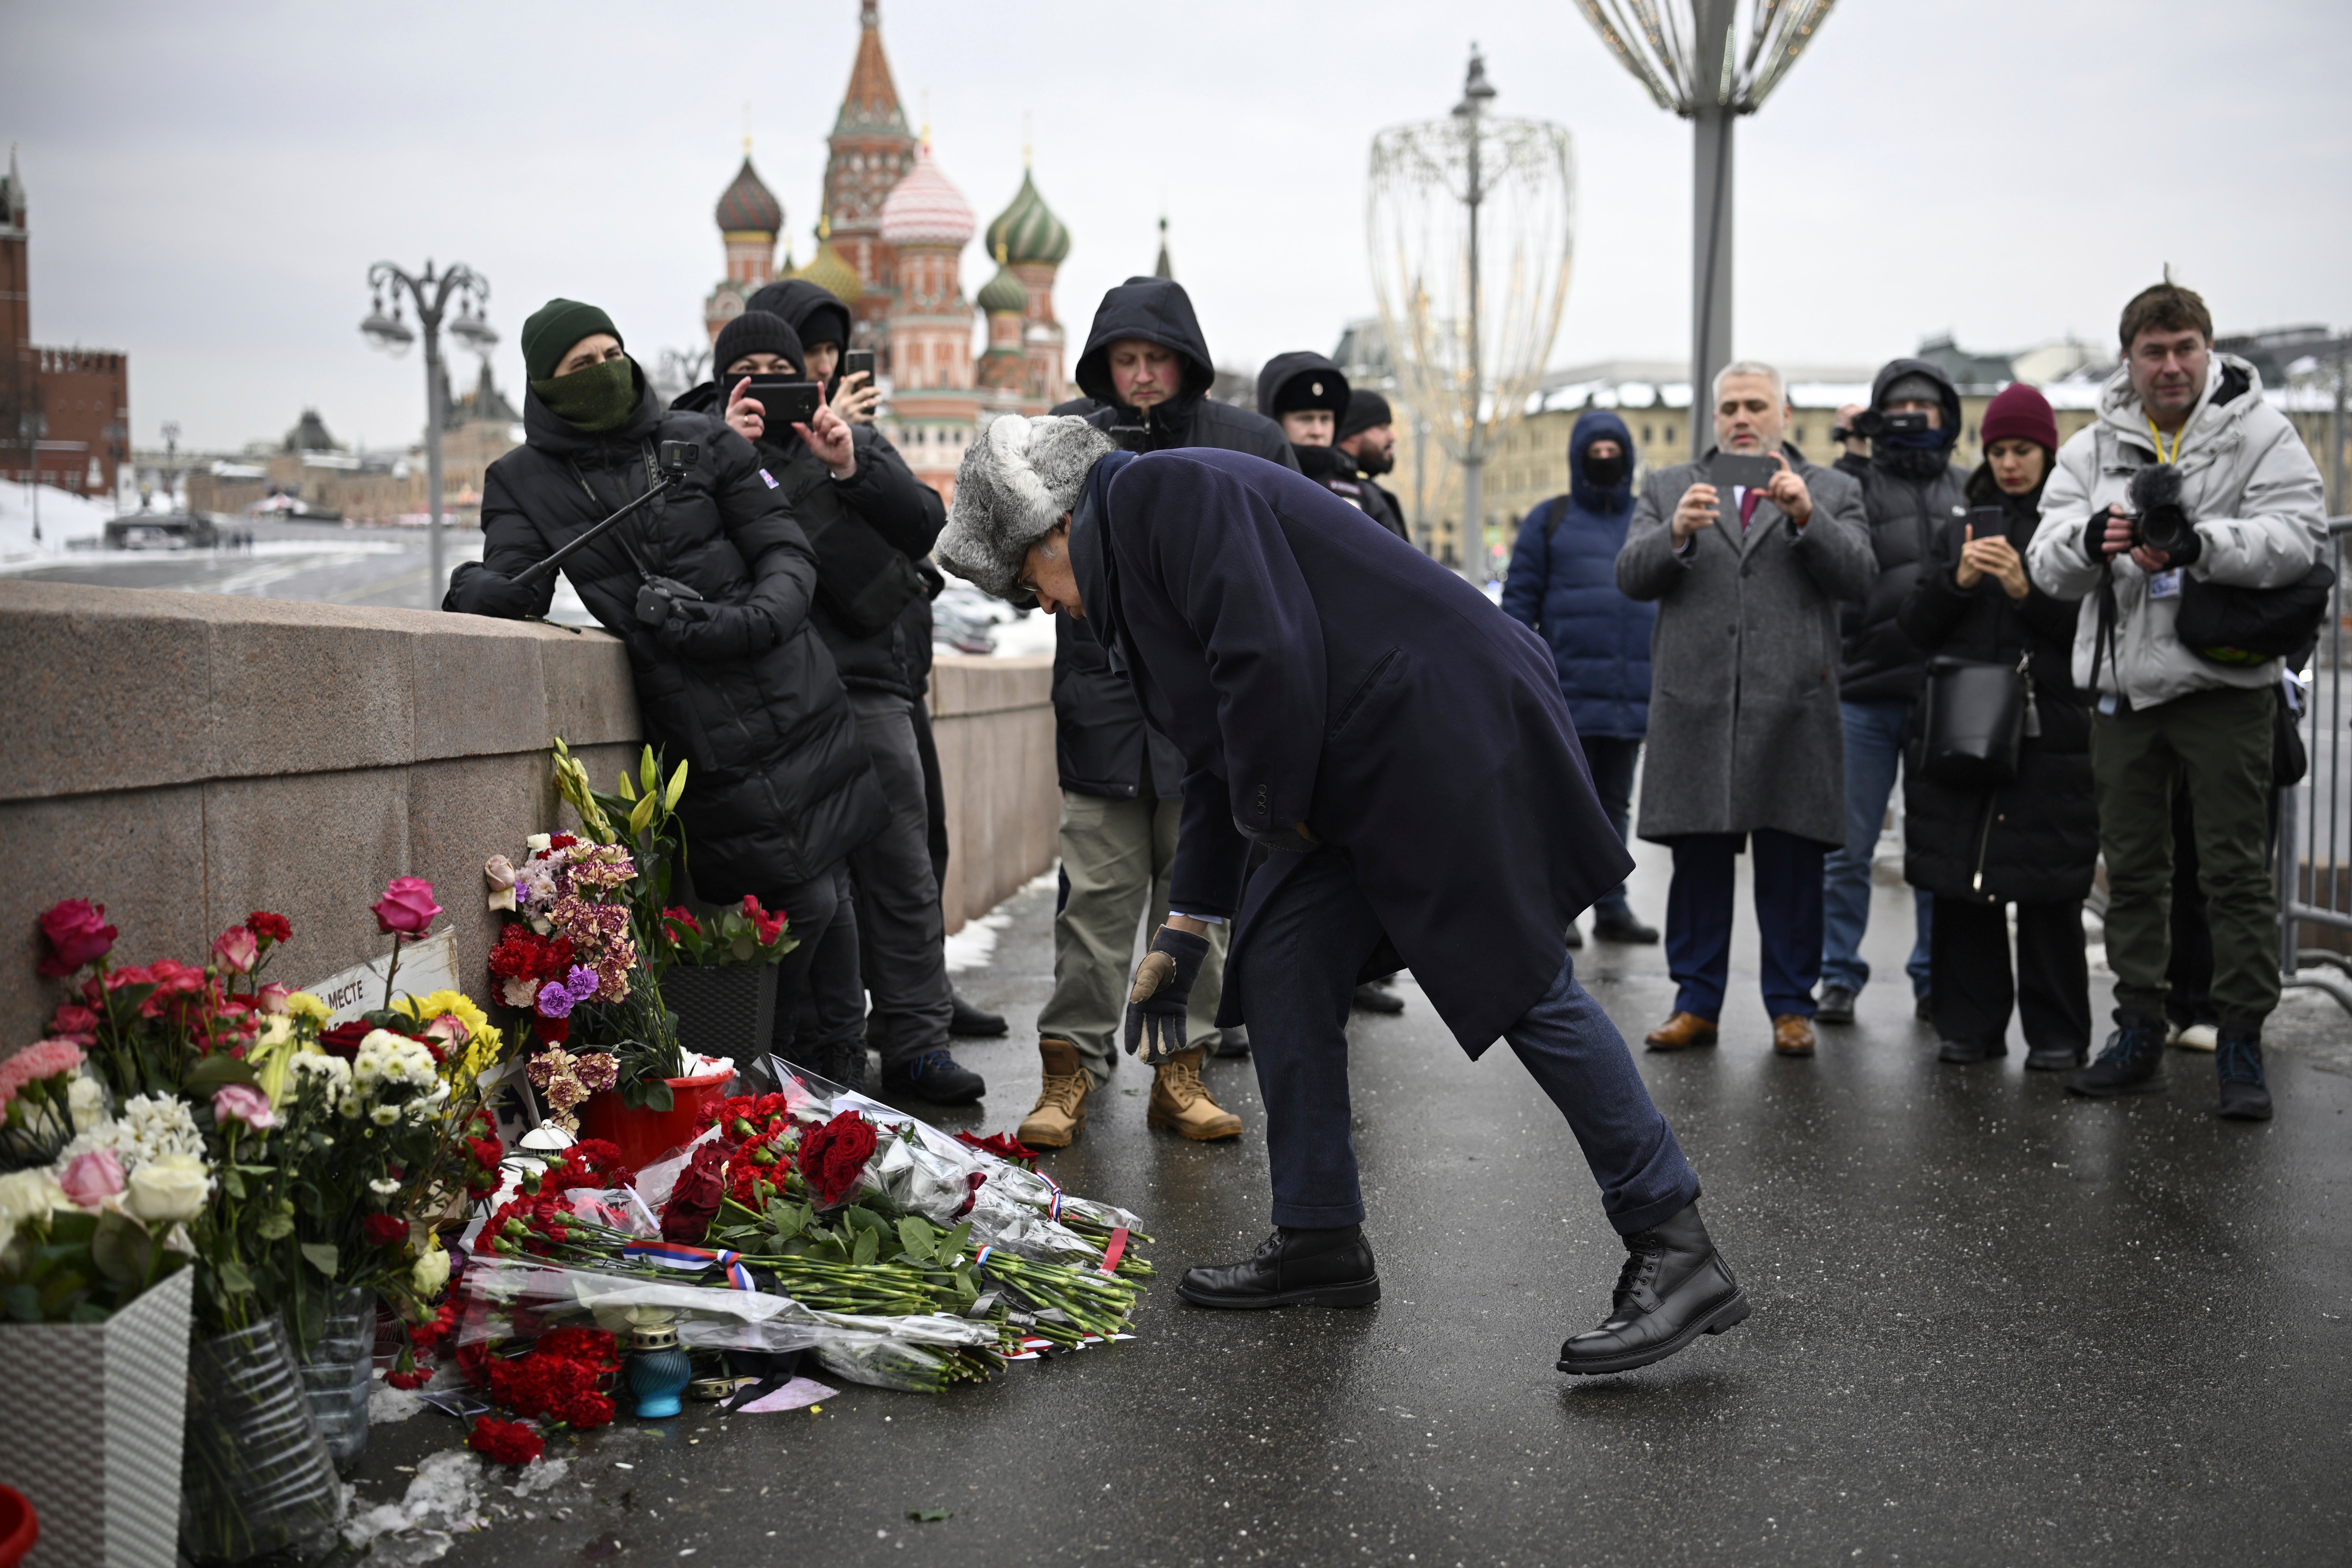 French Ambassador to Russia Pierre L'vy lays flowers at the place where Russian opposition leader Boris Nemtsov was gunned in 2015